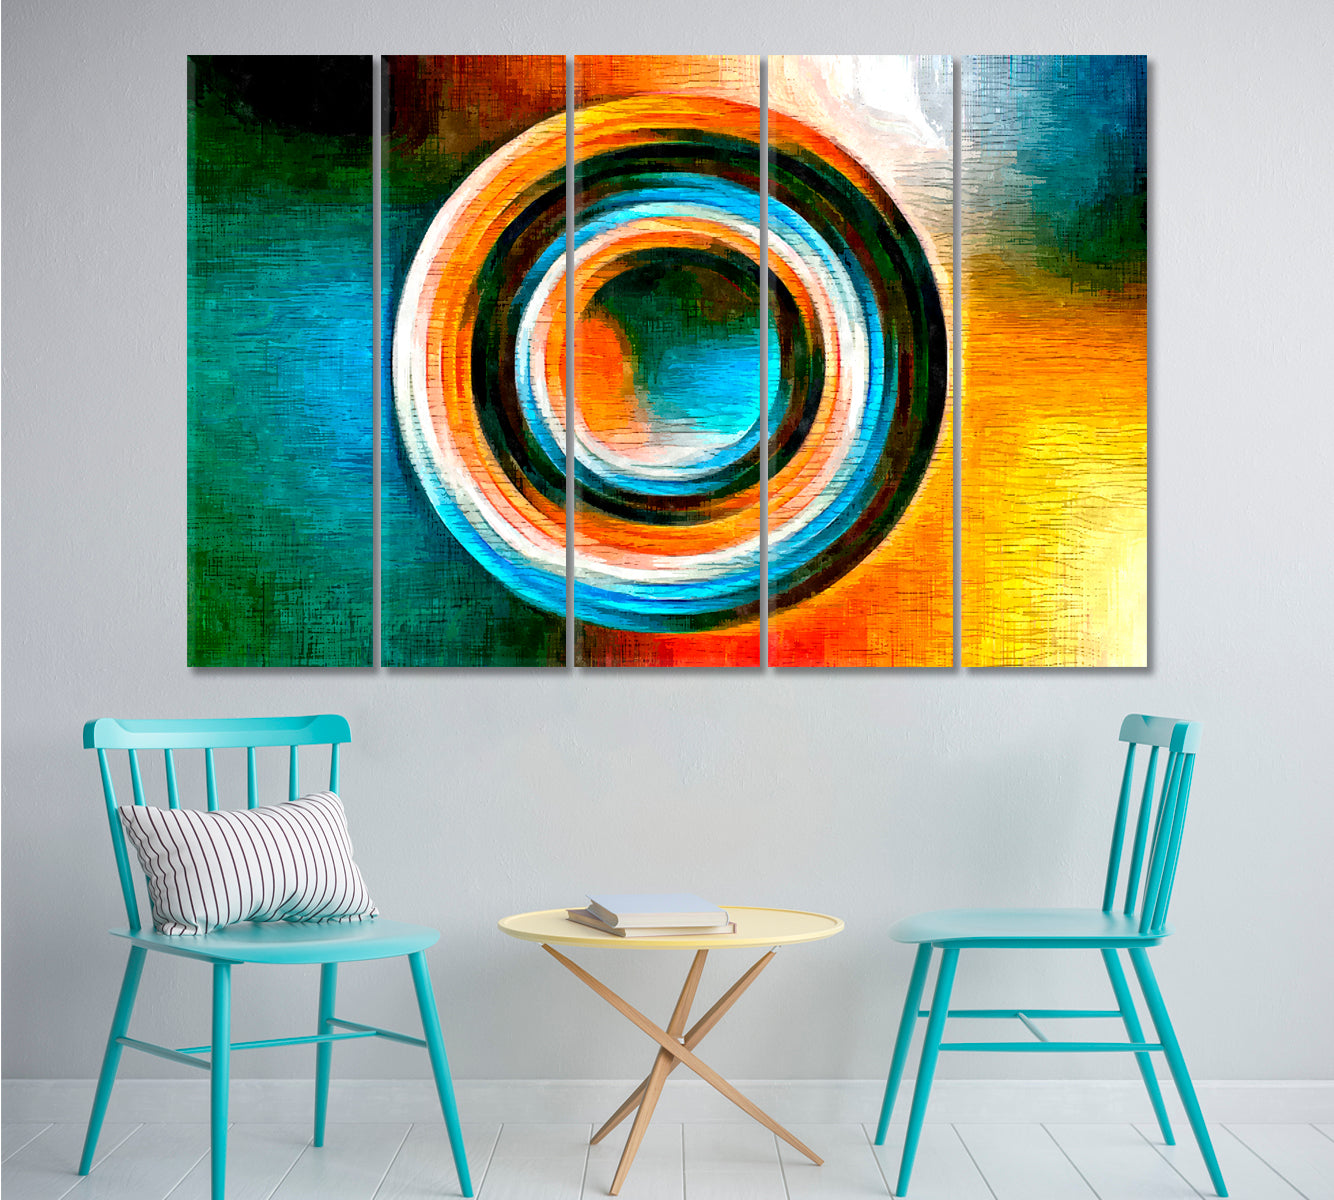 Colored Circle Focal Point Turquoise Orange Geometric Shape Modernism Abstract Art Print Artesty 5 panels 36" x 24" 